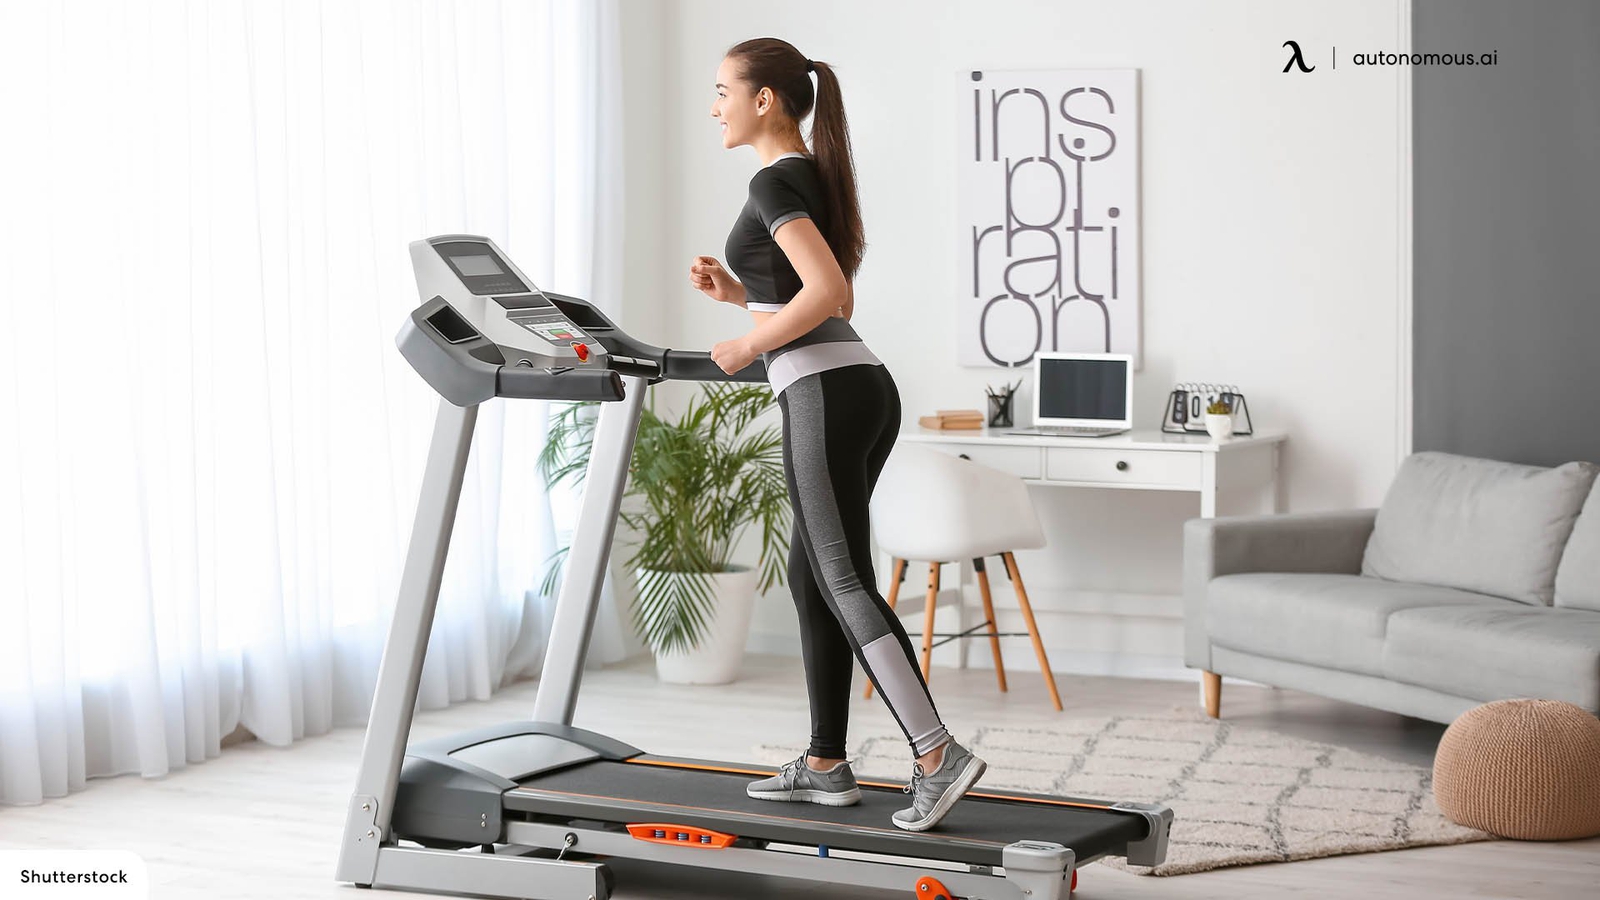 Treadmill Buying Guide: What You Need To Know Before Purchasing